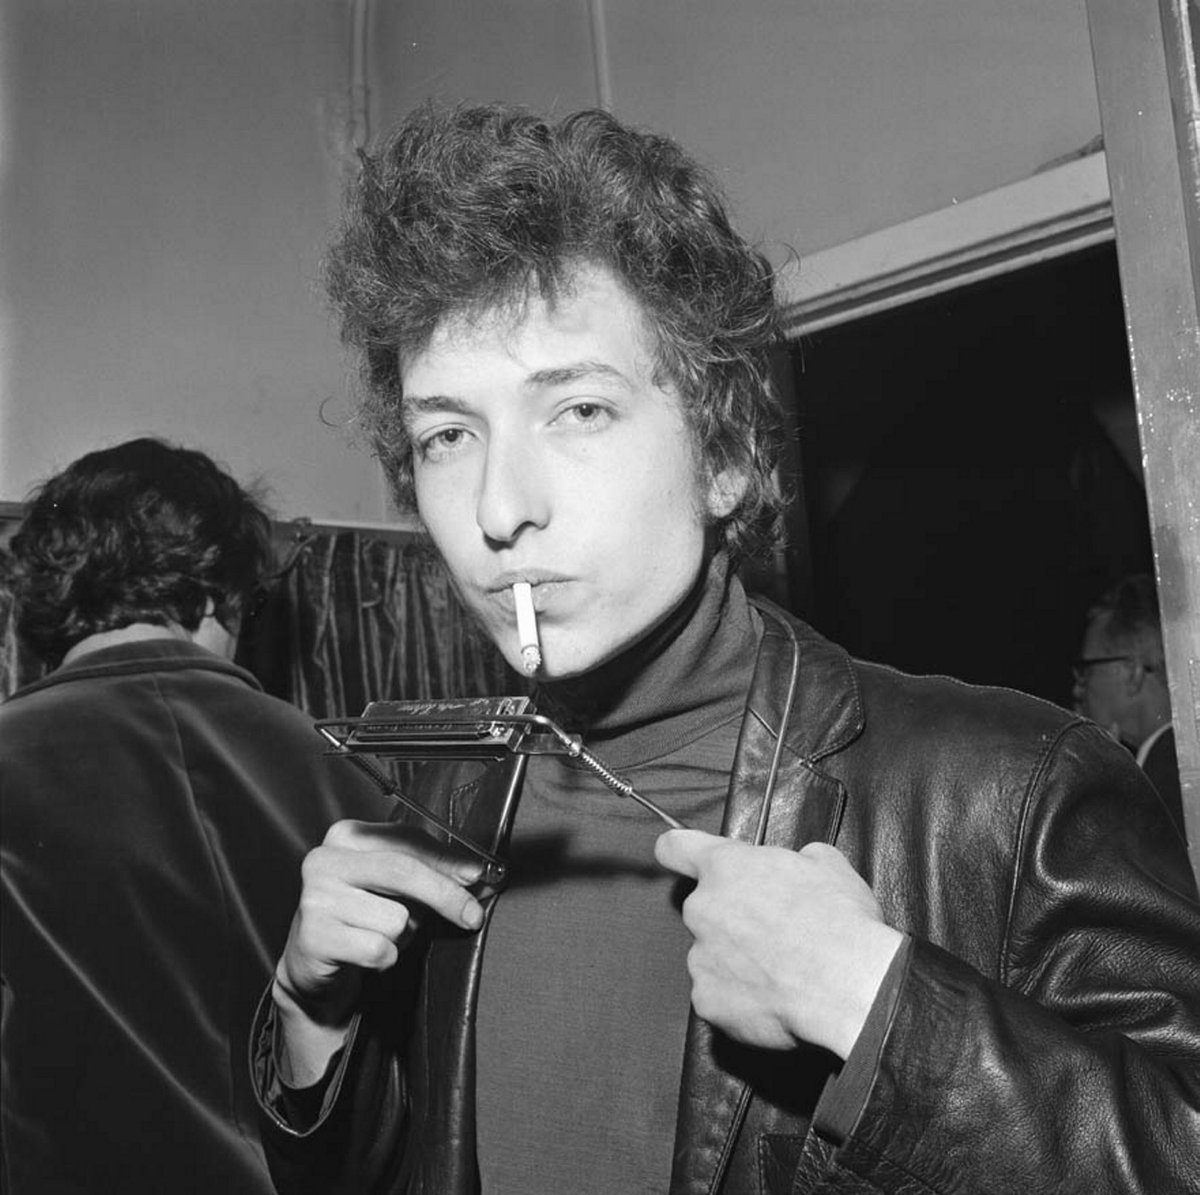 Bob Dylan is very well known singer/songwriter. In all honesty much of his music is decent and well made with good intentions. But he is another big star who has mentioned the unseen forces who control the industry....